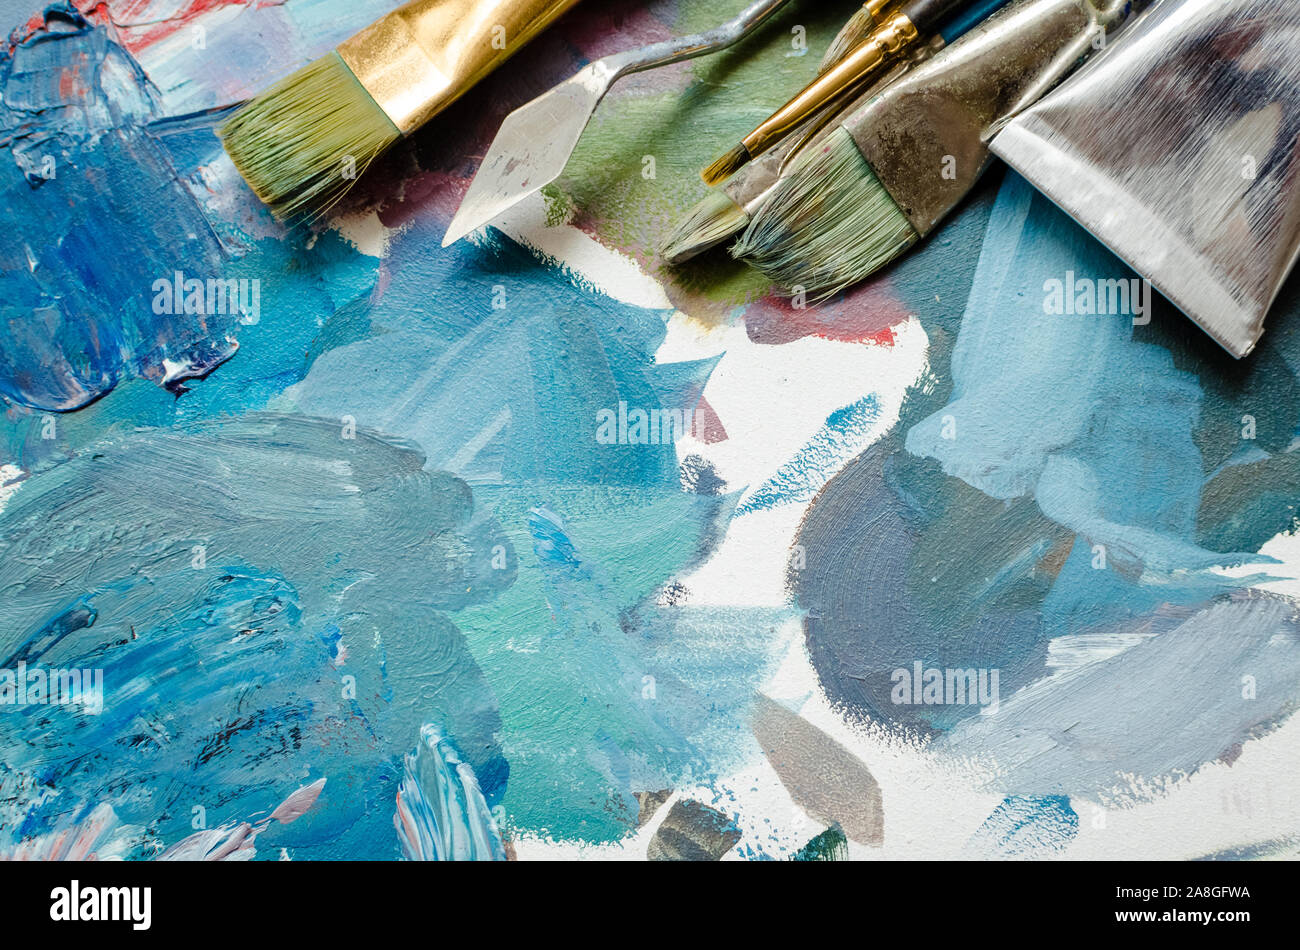 Artist paint brushes and oil paint tubes on wooden palette. Texture mixed  oil paints in different colors. Instruments and tools for creative leisure  Stock Photo - Alamy